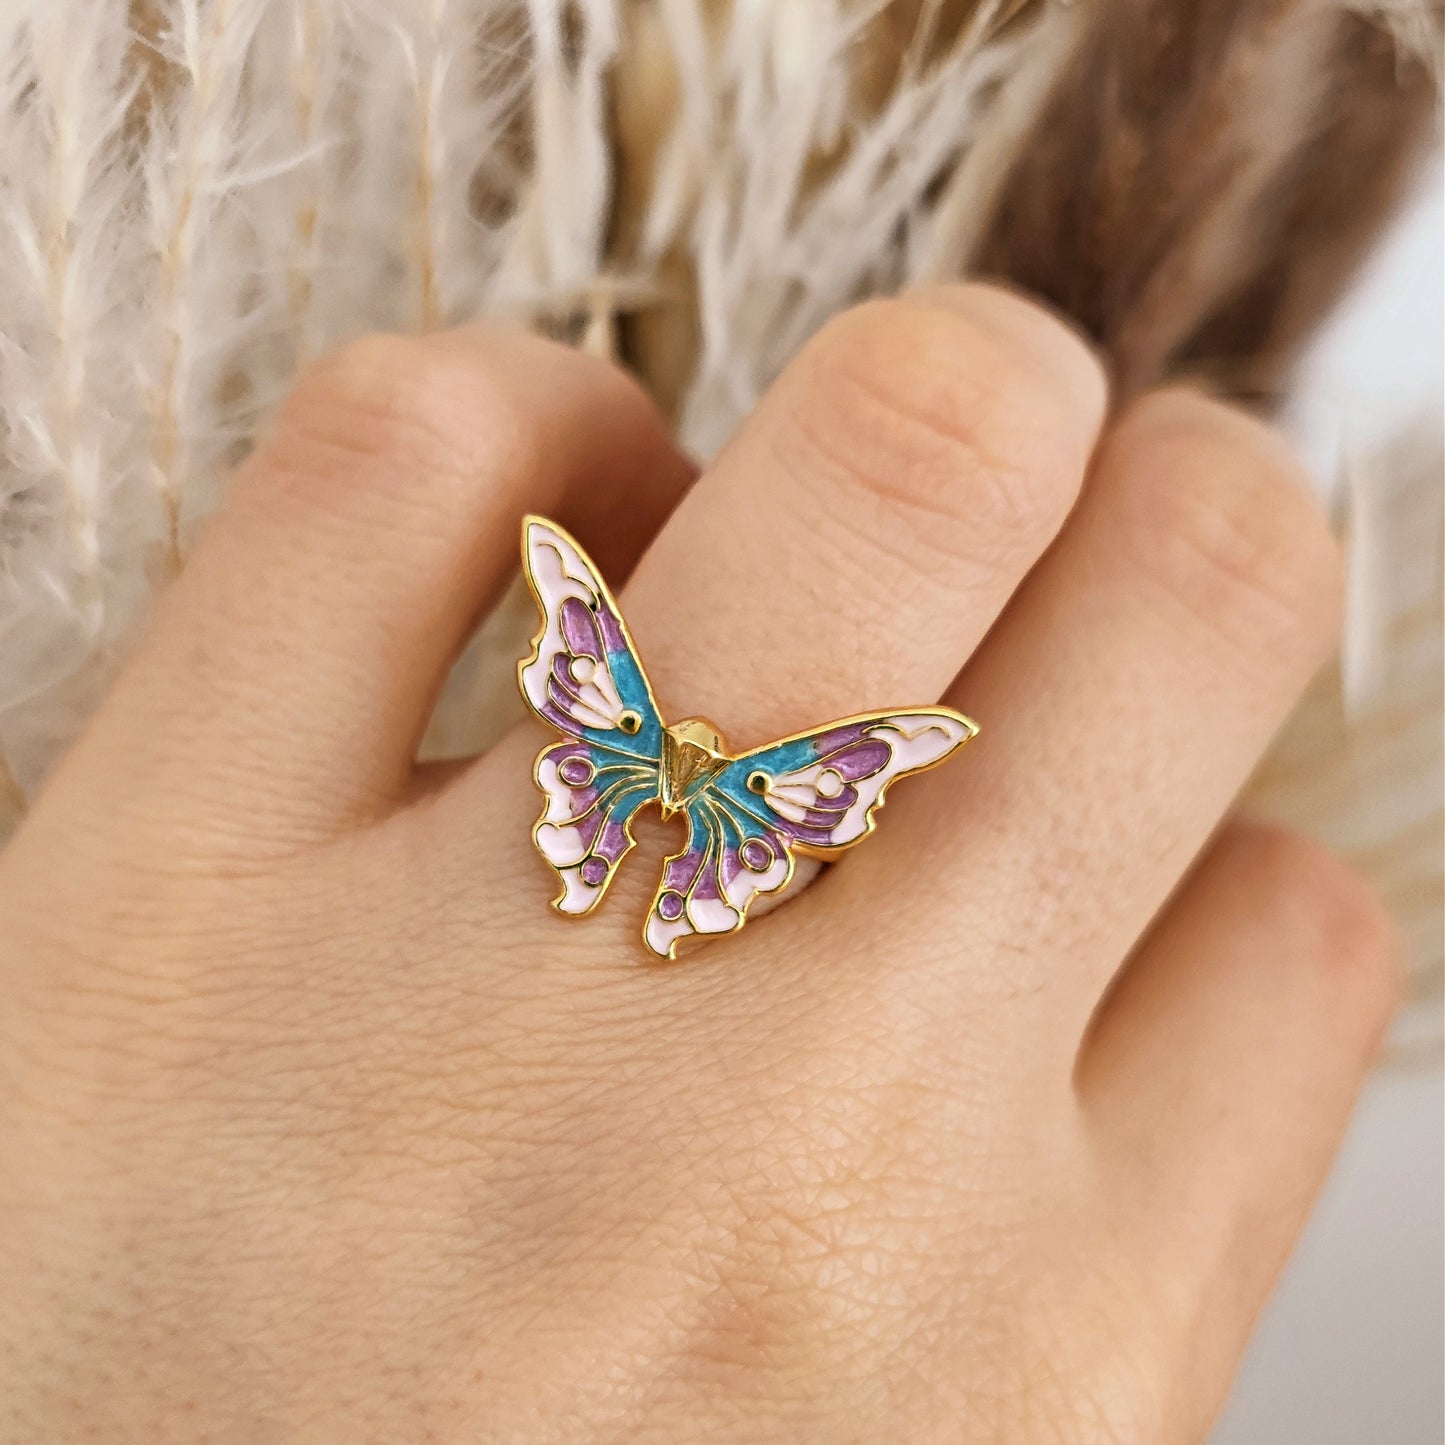 Fairy Butterfly Princess Ring, Mariposa Pastel Ring, Princess core Butterfly Ring, Coquette Princess Ring, Y2K Ring